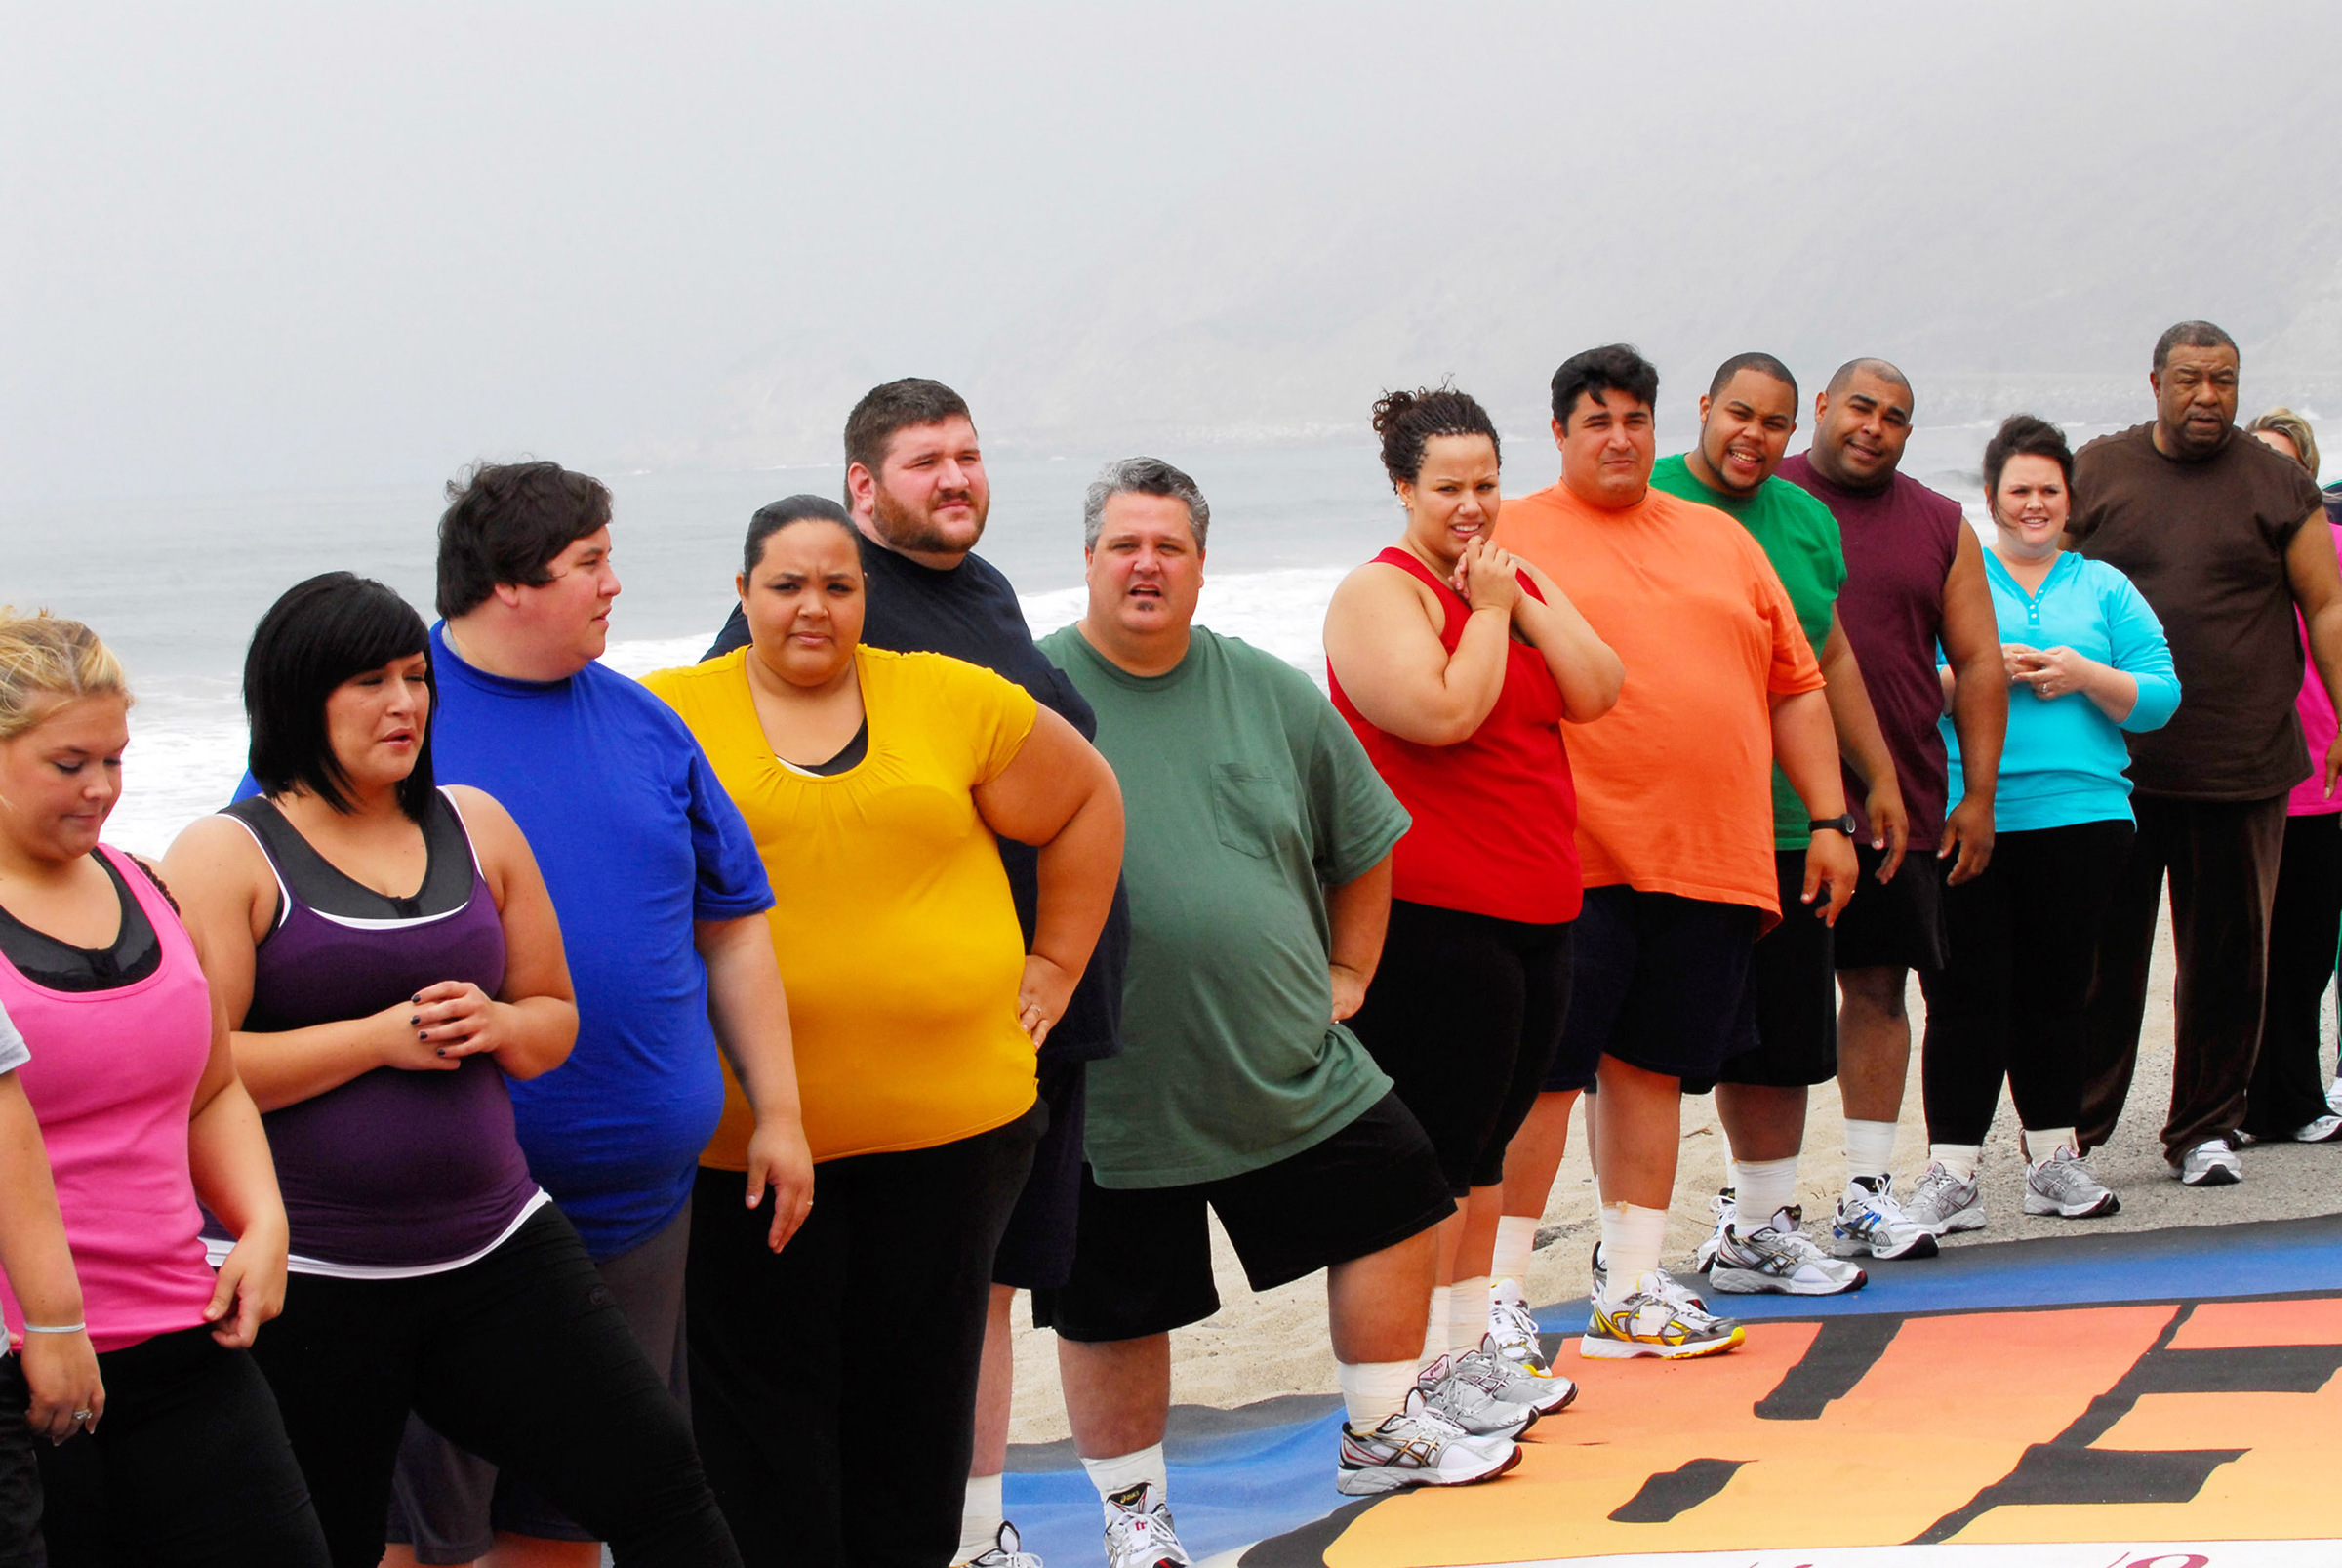 The Biggest Loser The 50 Most Influential Reality TV Seasons TIME